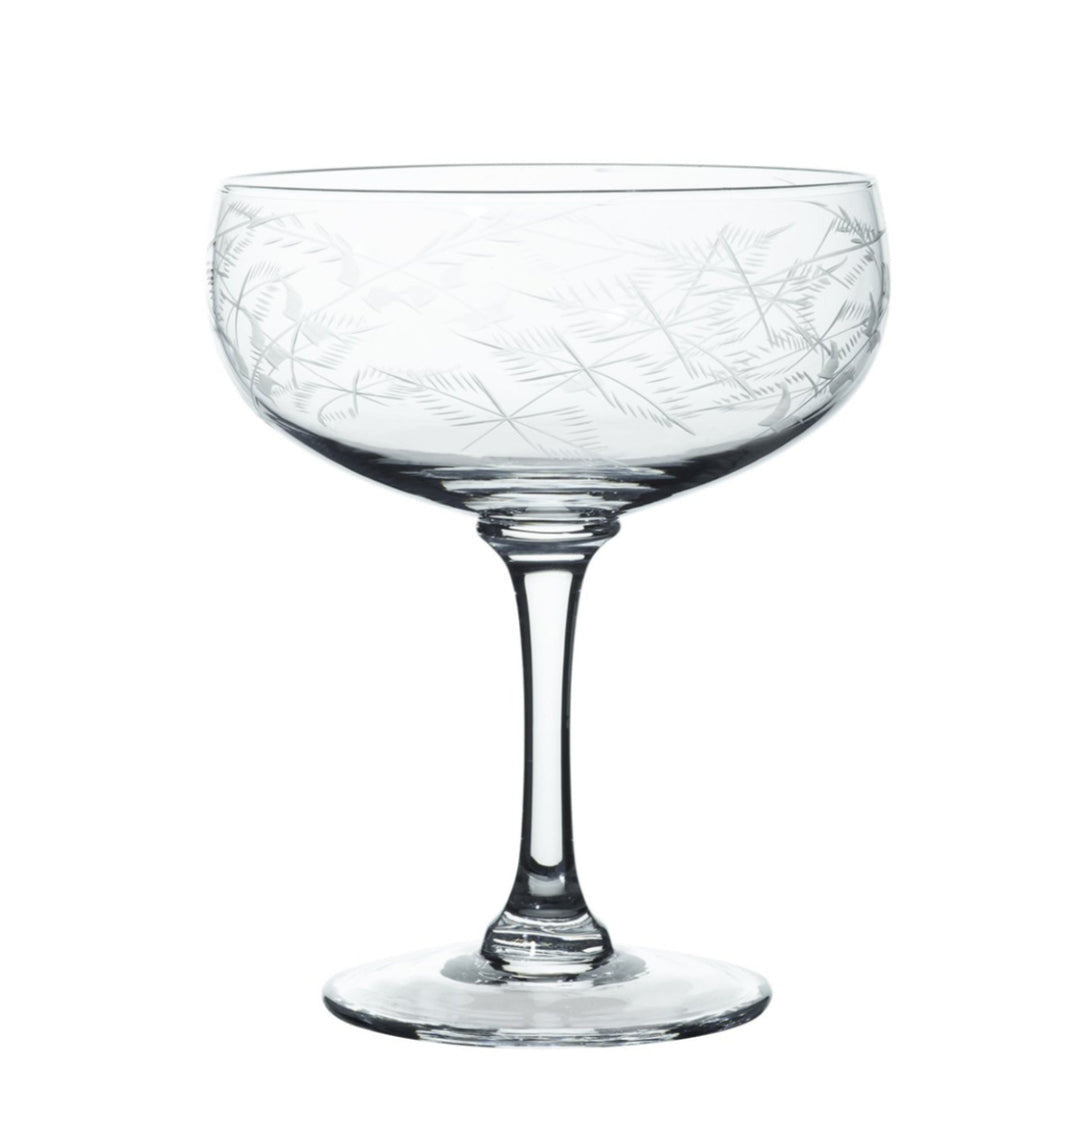 Cocktail Glass with Fern Design by The Vintage List.